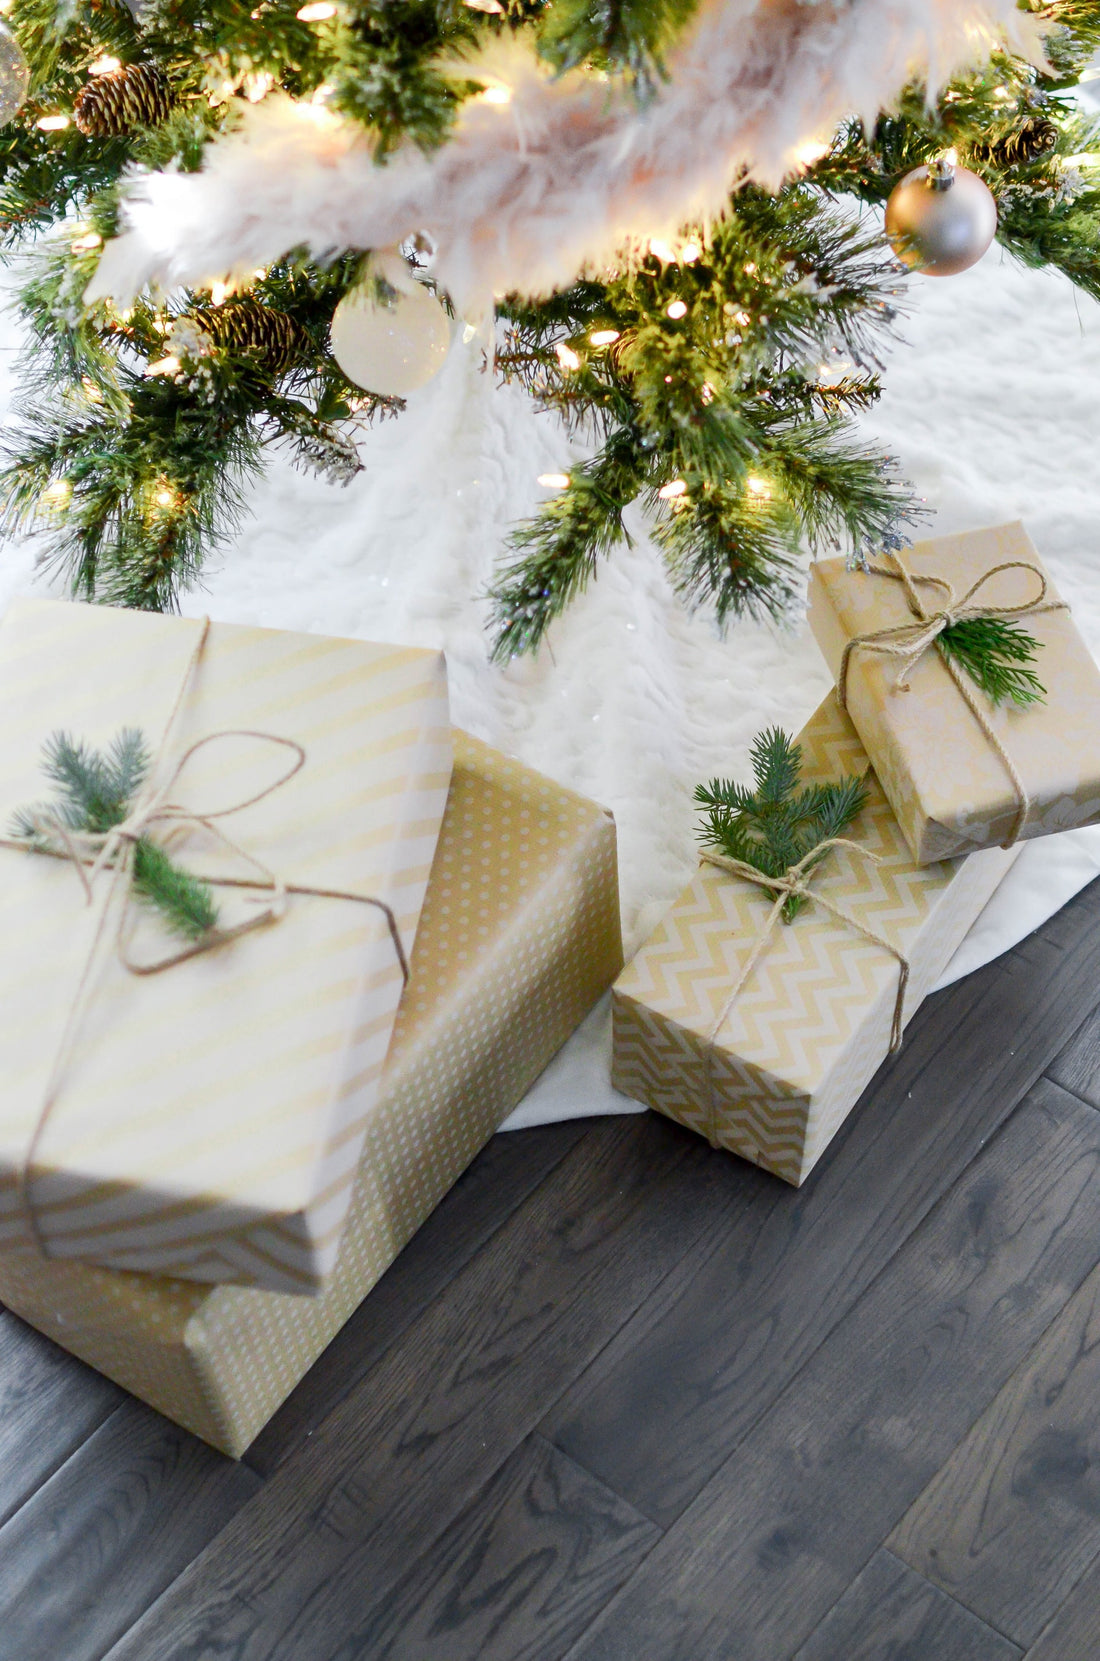 Tips Before Buying Personalized Gifts for Christmas